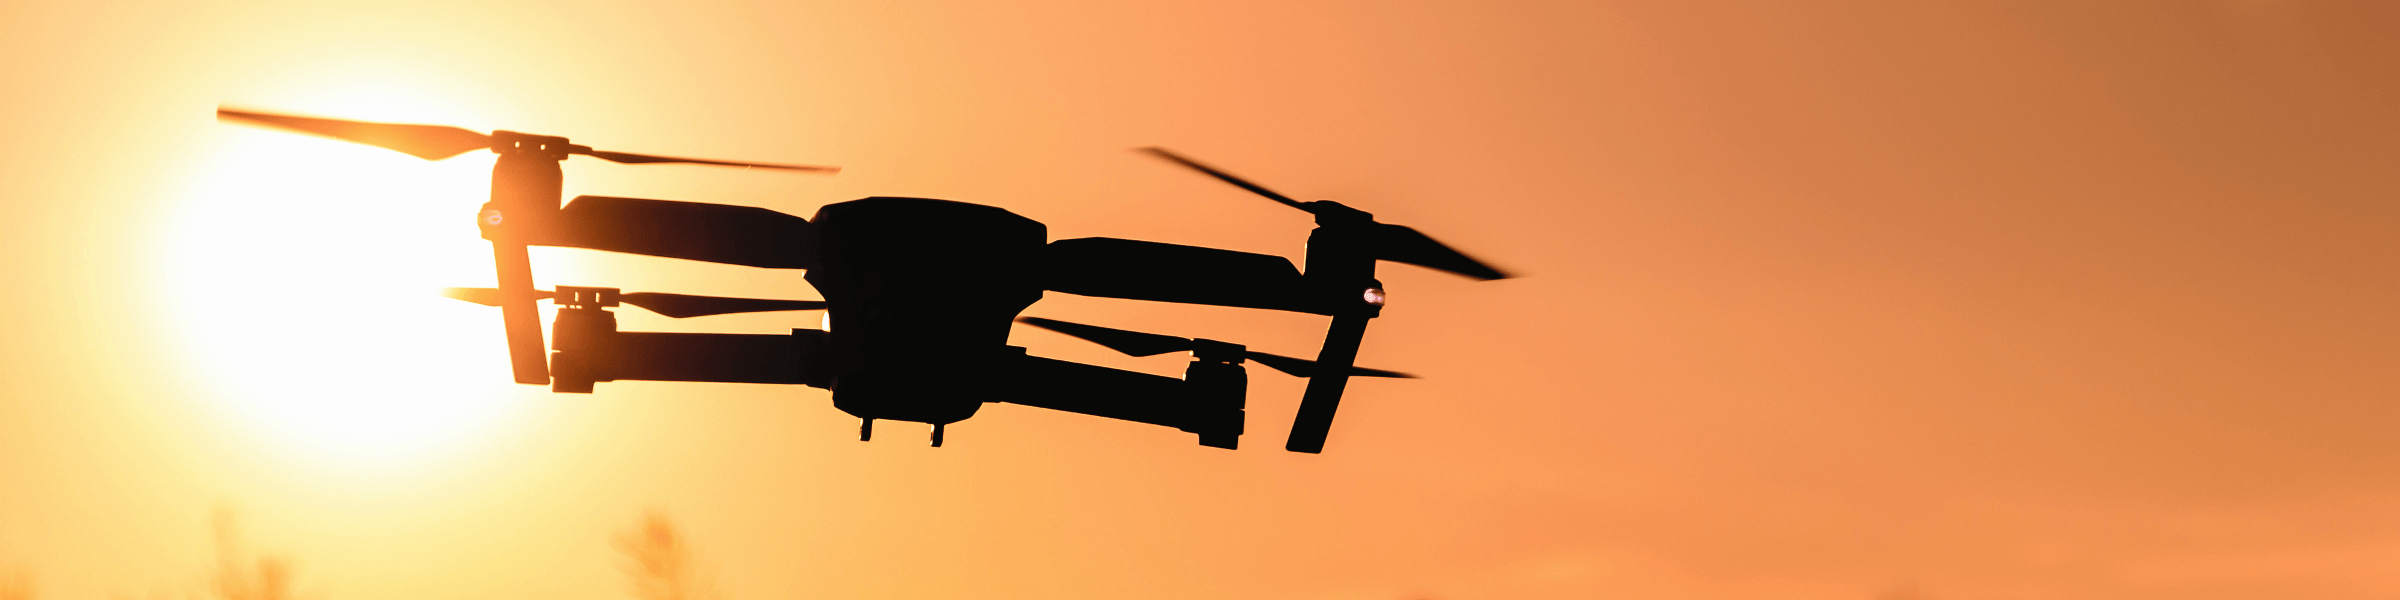 DPM-Division-Drone-Major-Consultancy-Services-Solutions-Hub